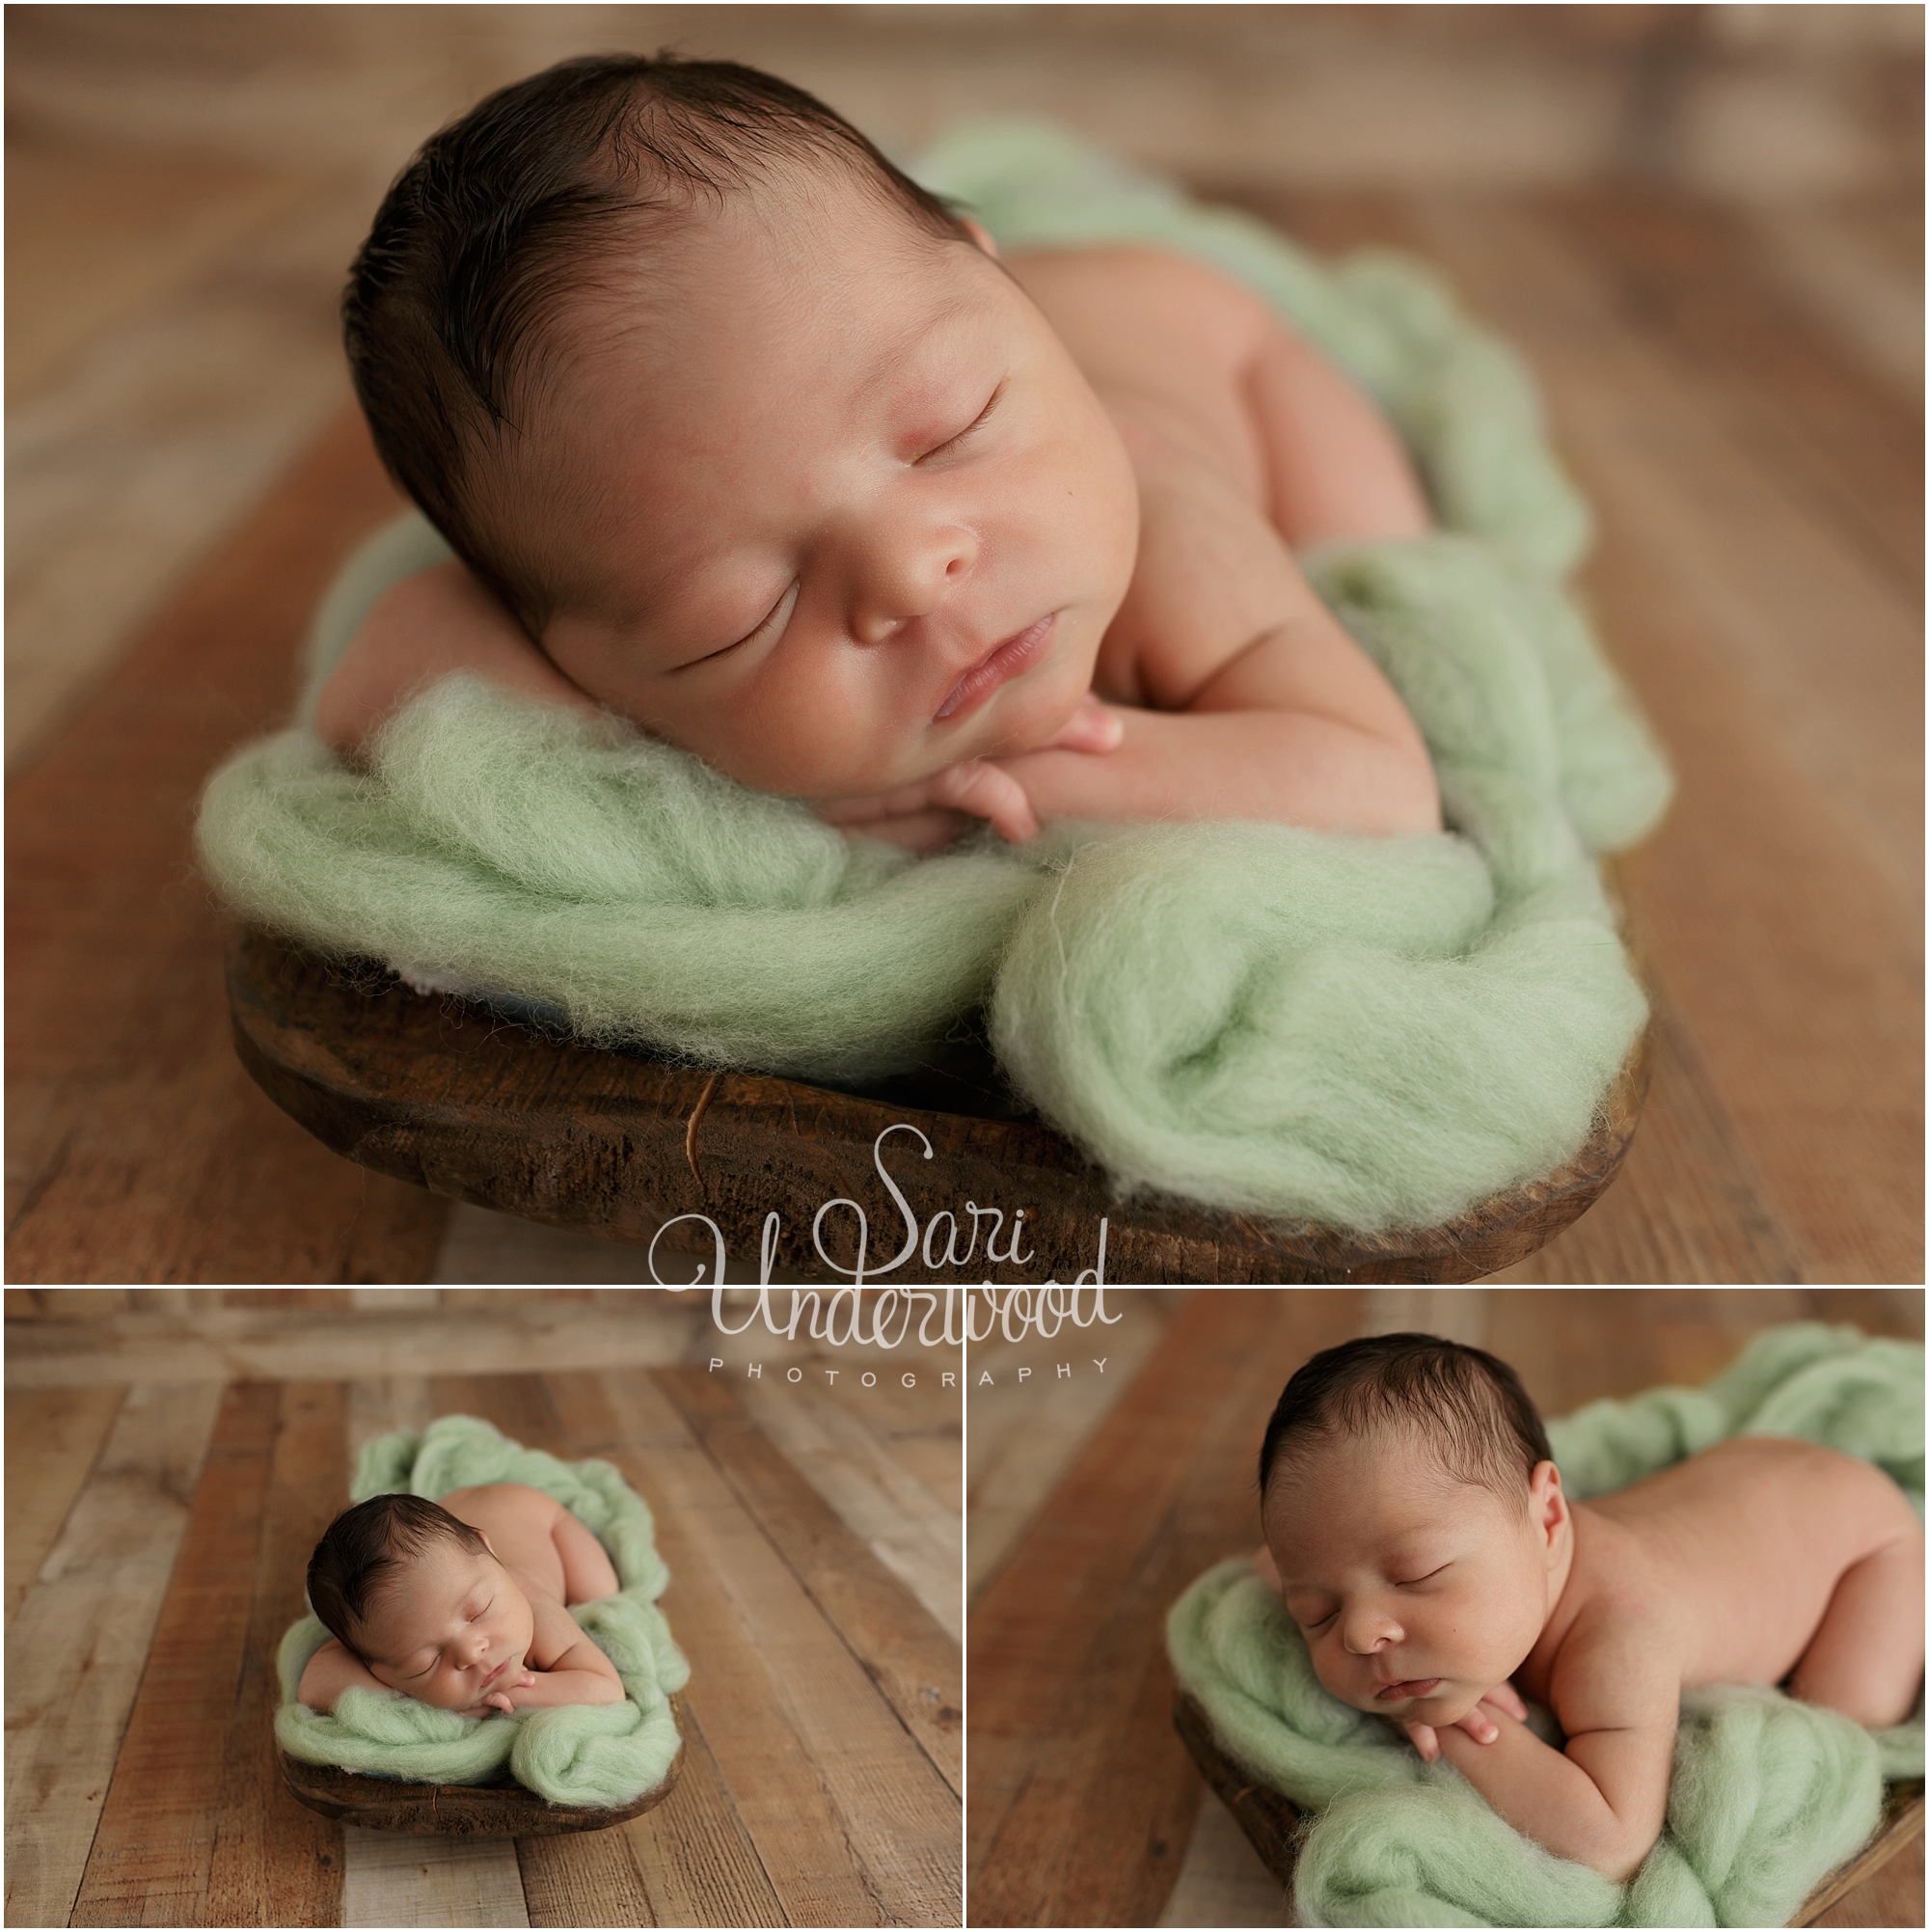 9 day old baby boy posed in a wooden bowl